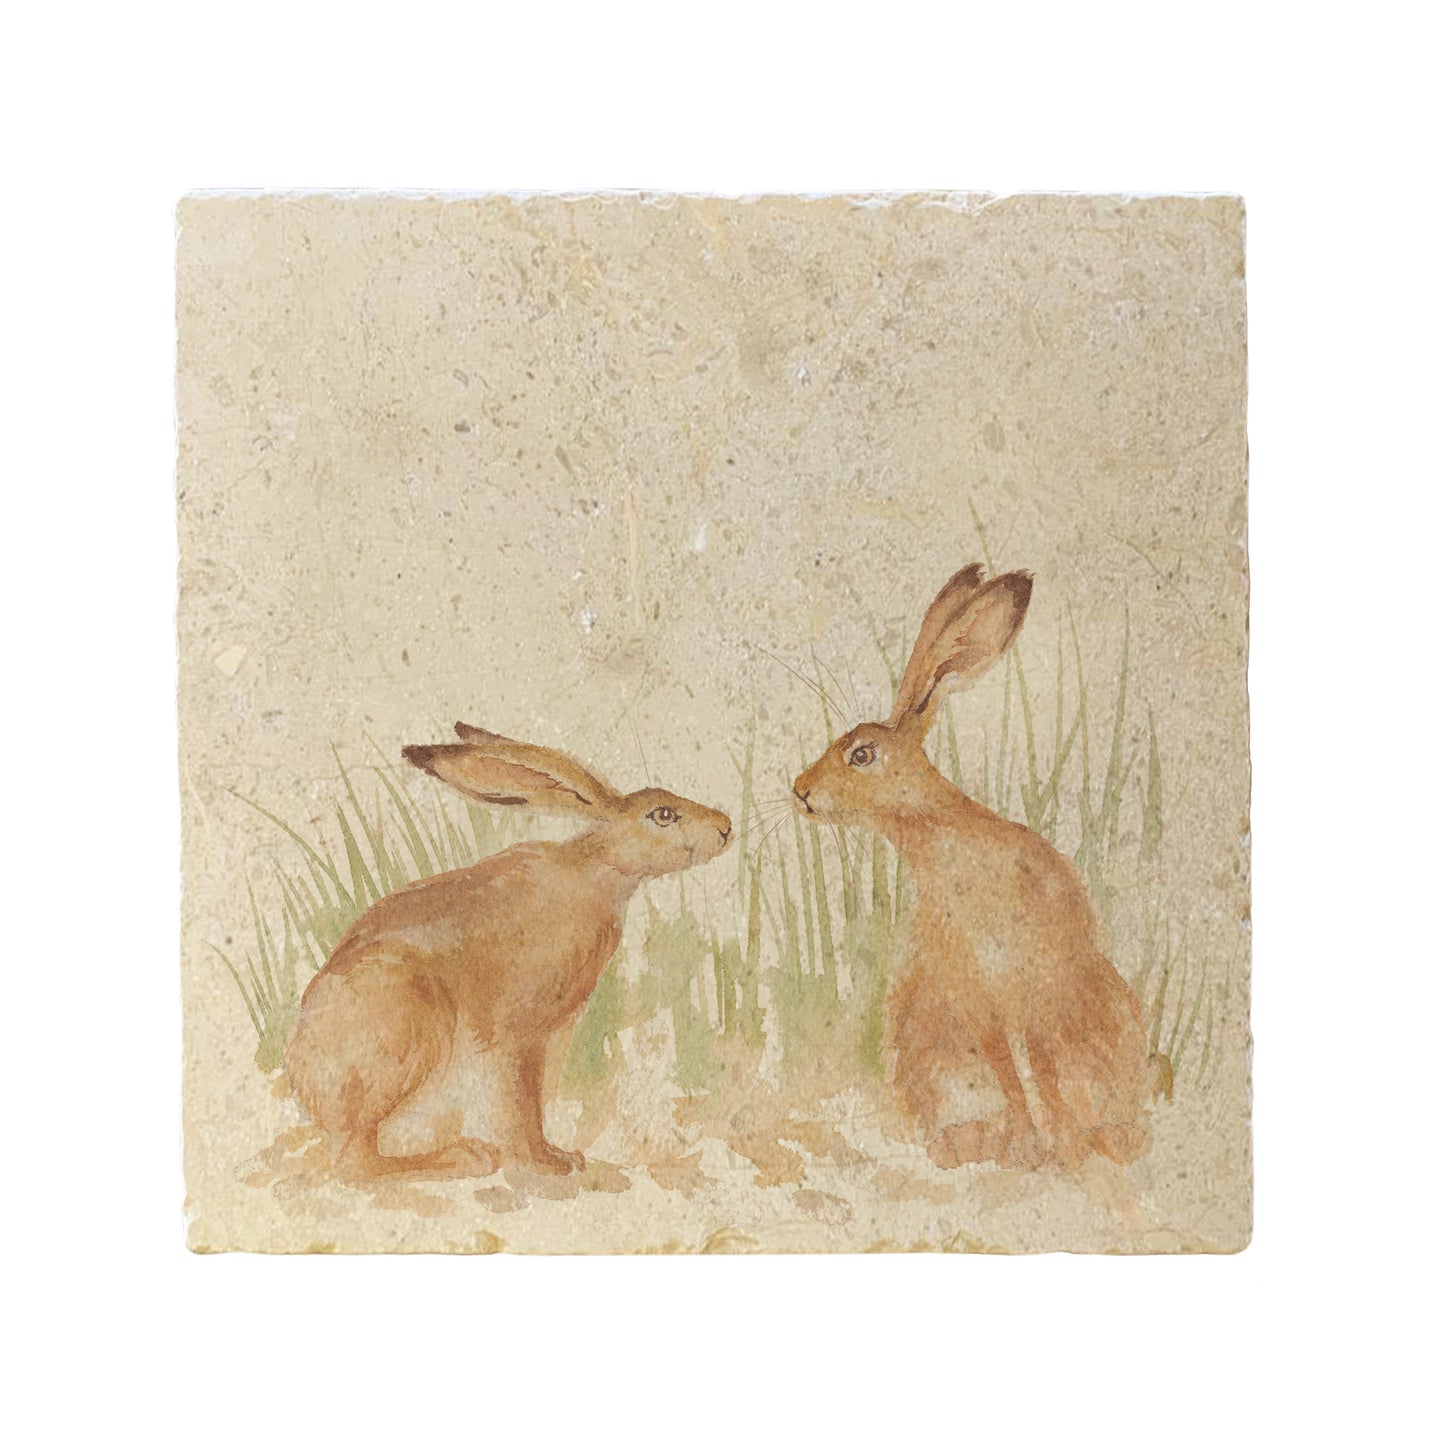 A square marble placemat with a design featuring two hares facing each other about to touch noses, in a watercolour style.